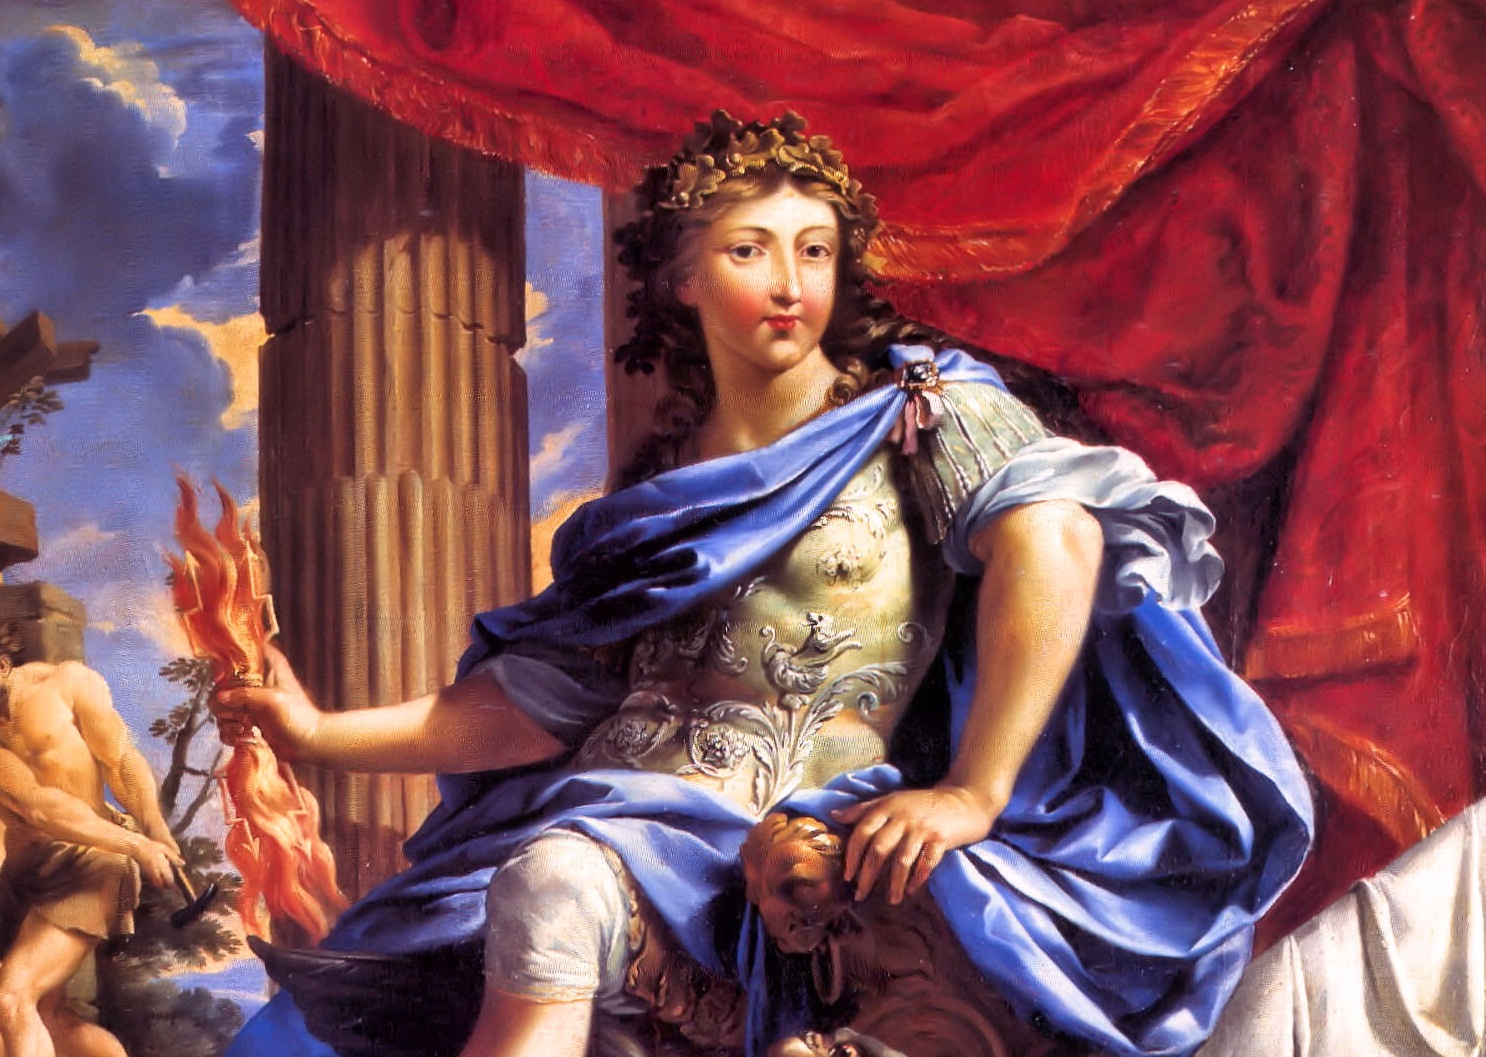 1638: Birth of the French King Louis XIV – the Most Powerful Ruler in Europe | www.neverfullbag.com